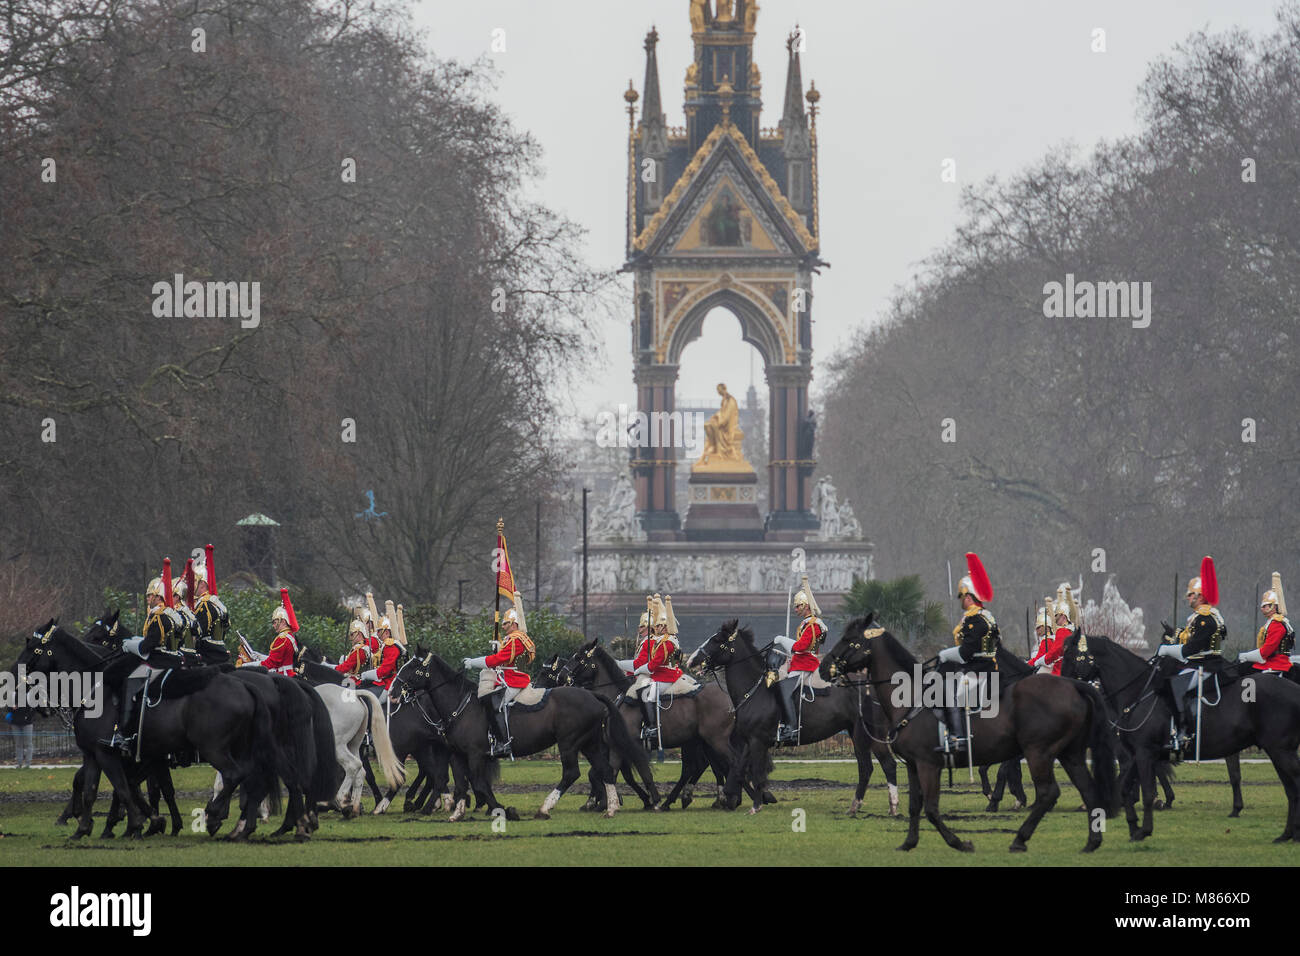 London, UK. 15th March, 2018. The Household Cavalry Mounted Regiment, the Queen’s mounted bodyguard parade in Hyde Park to prove their readiness to conduct state ceremonial duties for the year.  Their annual inspection was carried out by Major General Ben Bathurst the General Officer Commanding the Household Division. Credit: Guy Bell/Alamy Live News Stock Photo